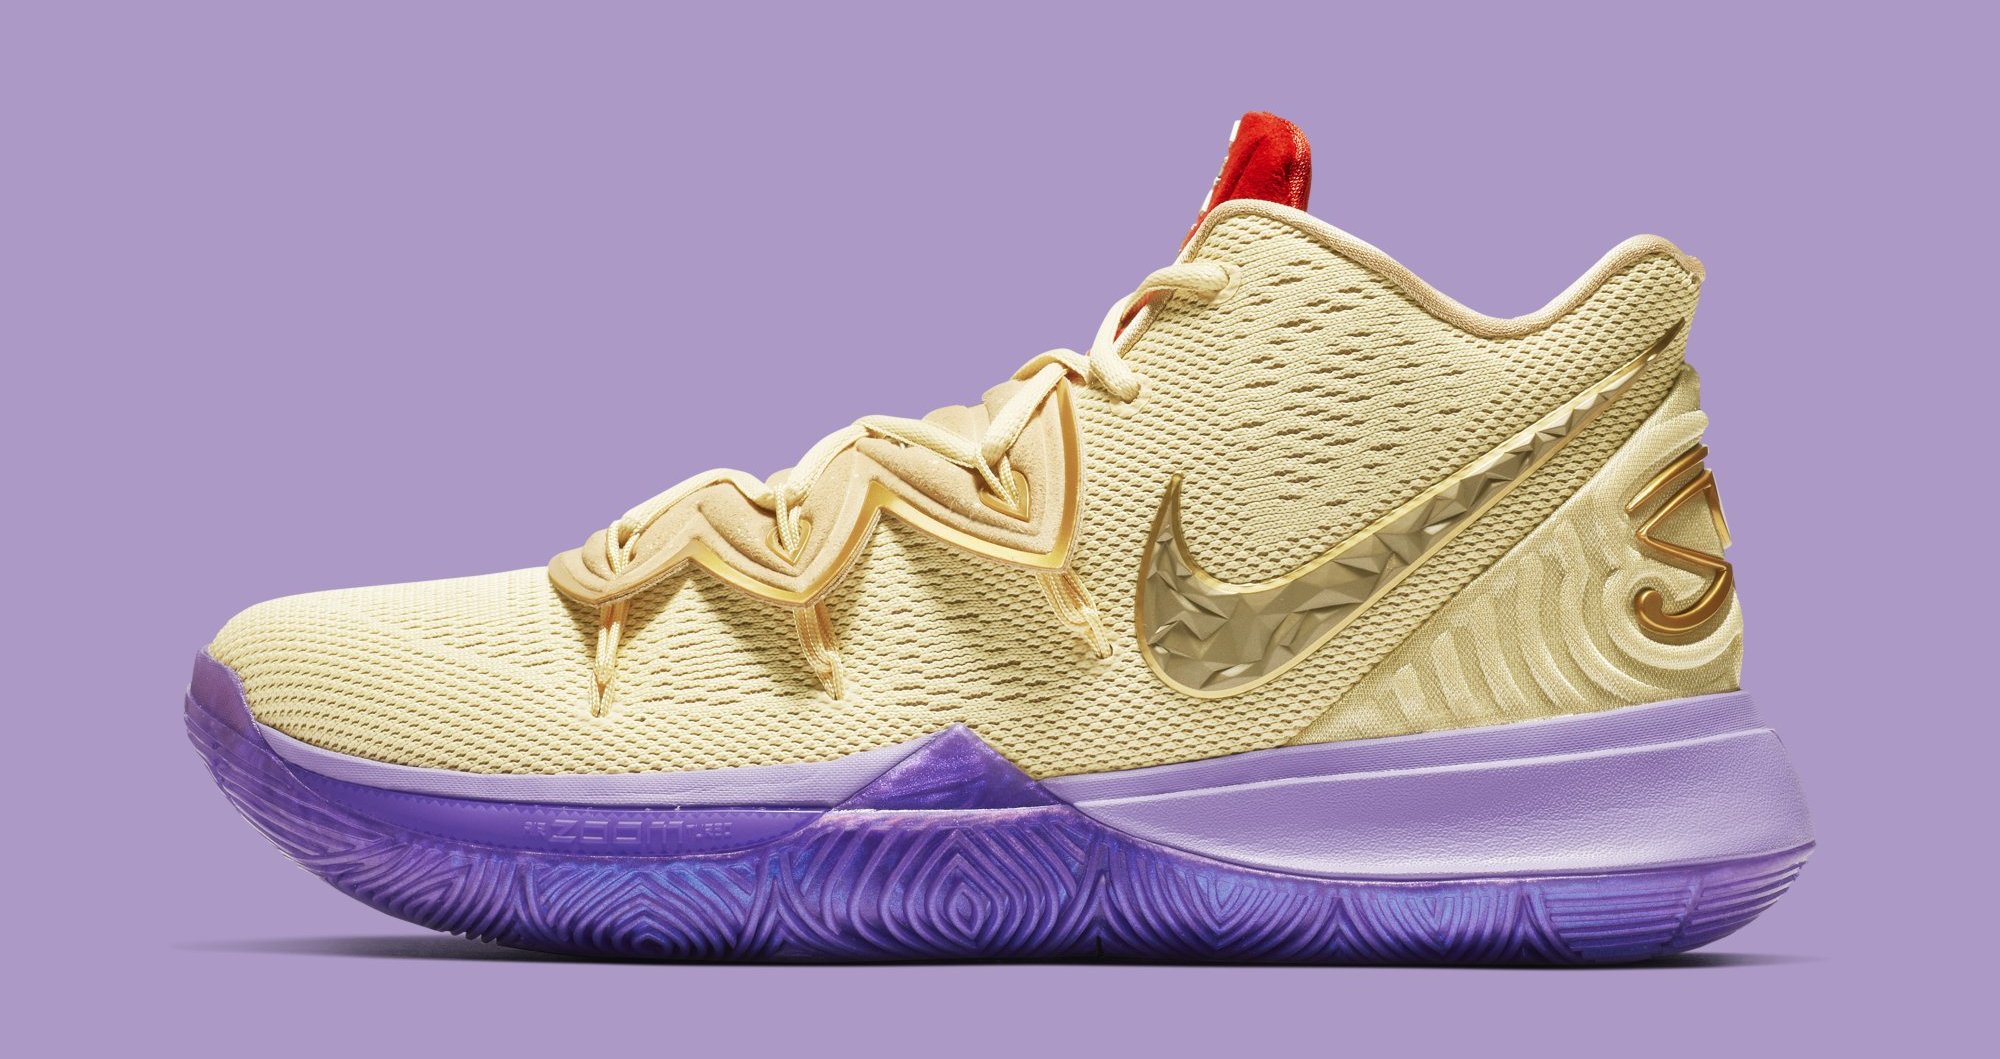 Concepts x Nike Kyrie 5 &#x27;Ikhet&#x27; CI9961 900 (Lateral)